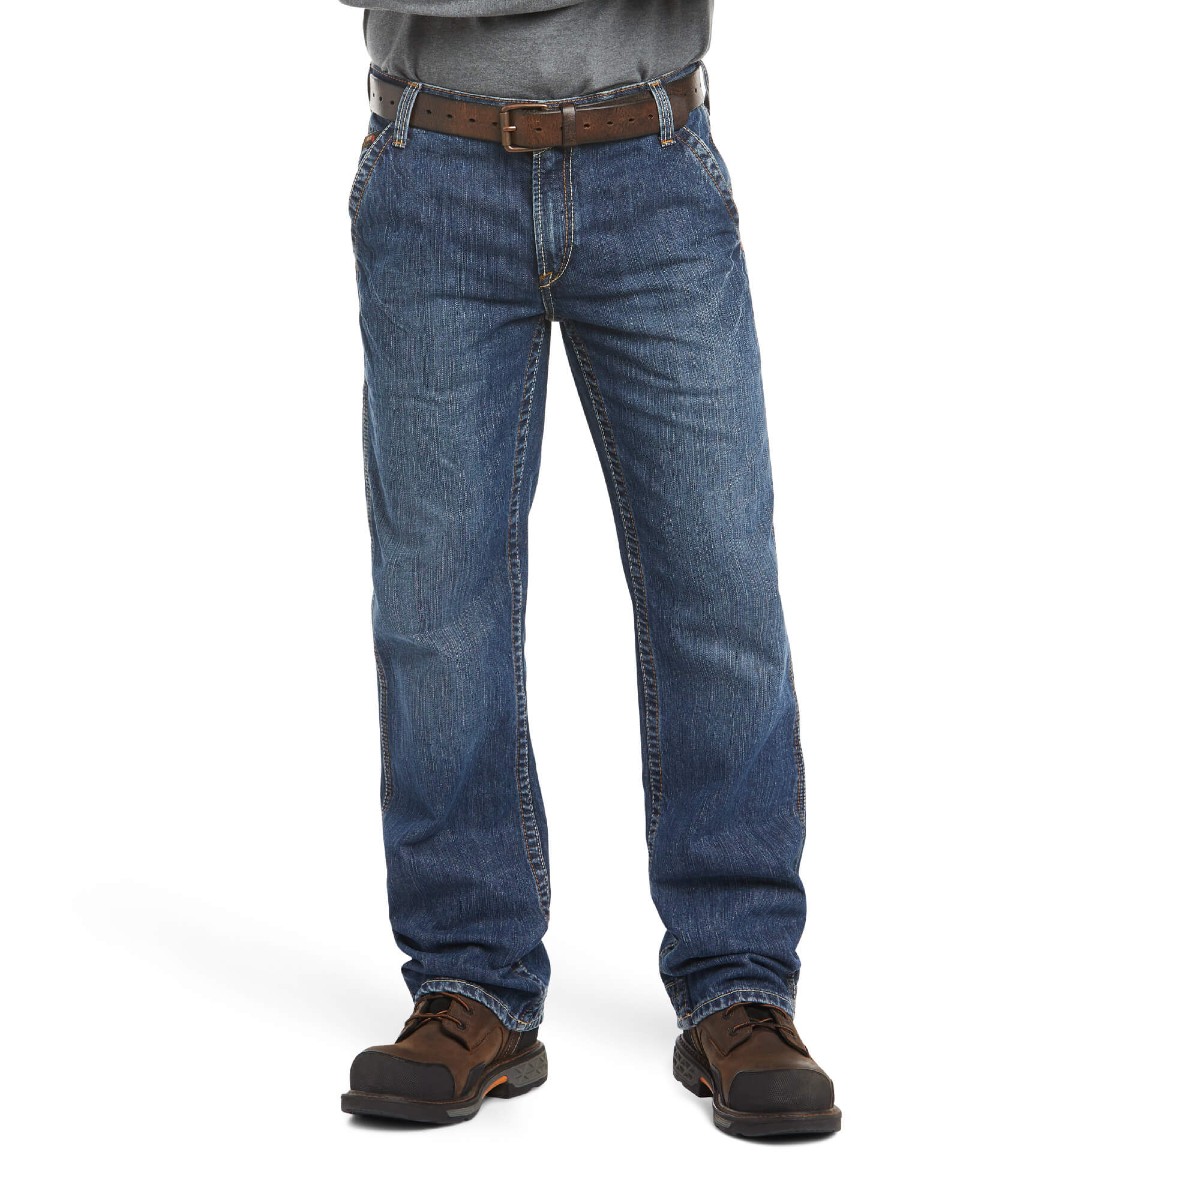 Ariat FR M4 Relaxed Workhorse Bootcut Pant in Gray